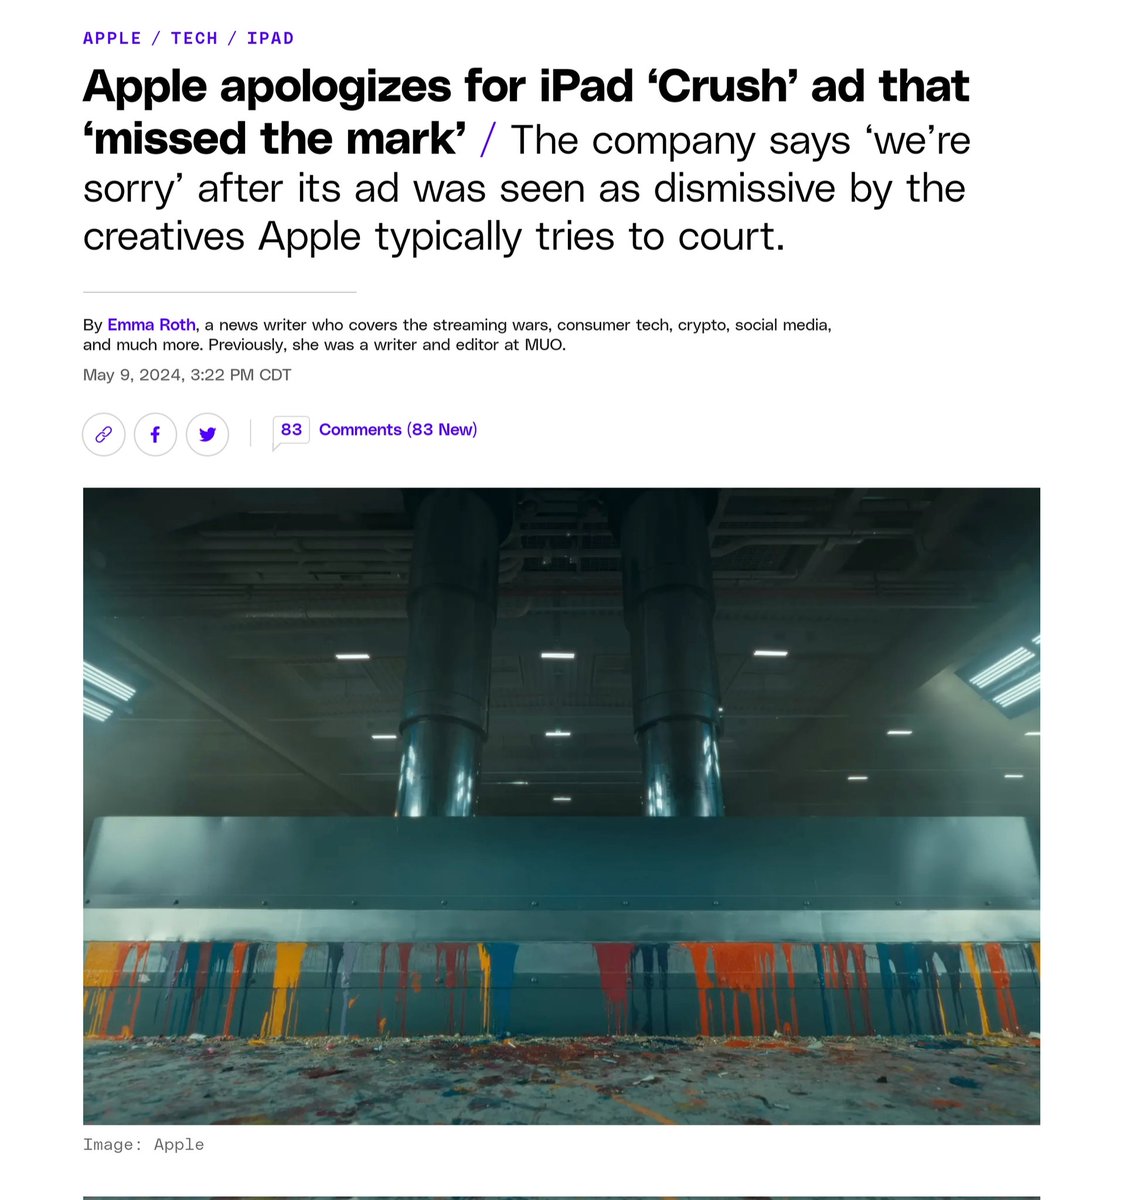 Apple removed and apologized for their hydrologic press ad 💀💀💀 What a world we live in 😂 People getting upset over something that makes no sense to be upset about, and Apple will apologize for it 😂